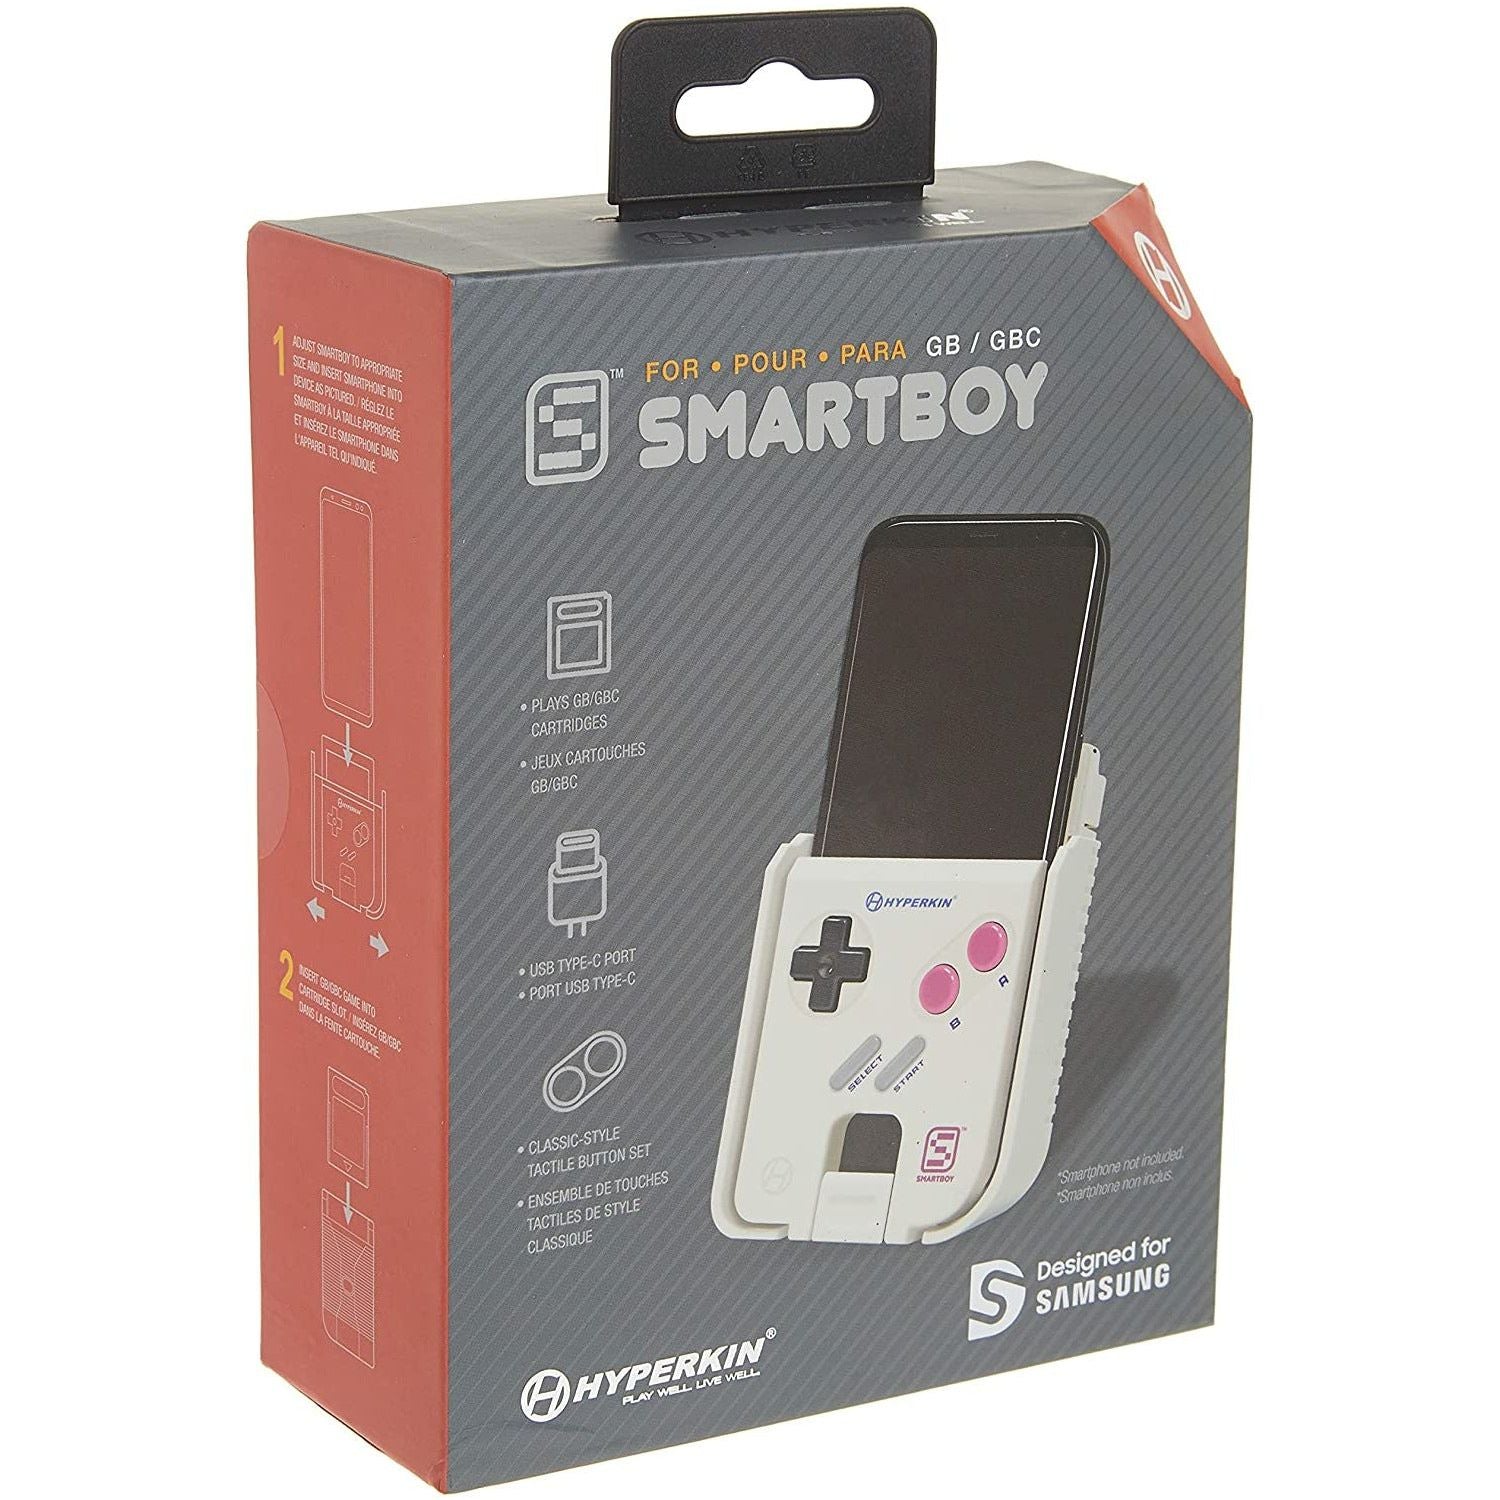 Smartboy Mobile Device for Game Boy/Game Boy Color (Android USB Type-C)